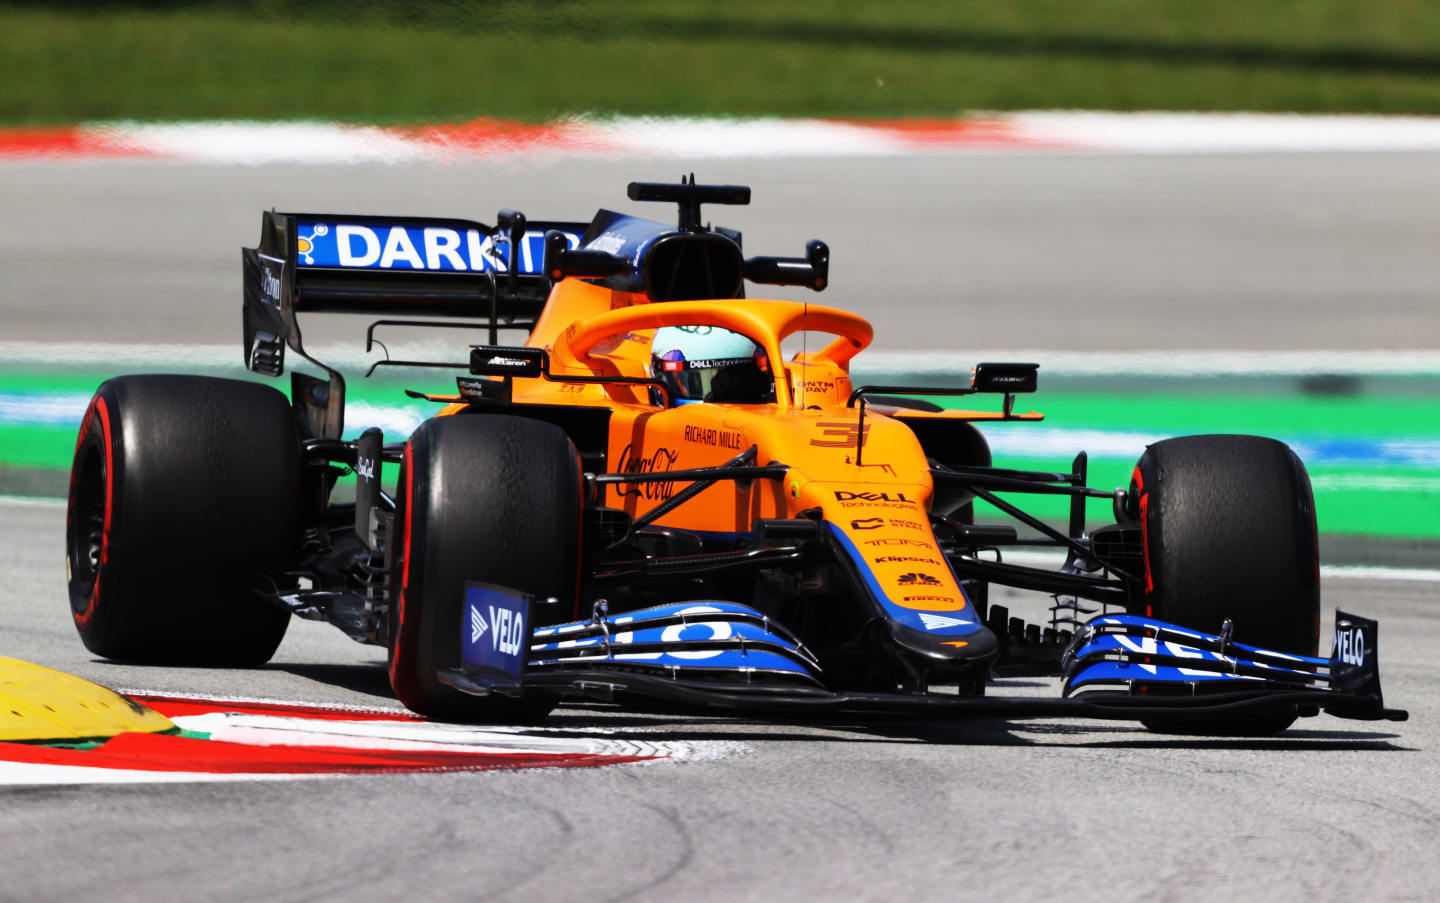 BARCELONA, SPAIN - MAY 07: Daniel Ricciardo of Australia driving the (3) McLaren F1 Team MCL35M Mercedes on track during practice for the F1 Grand Prix of Spain at Circuit de Barcelona-Catalunya on May 07, 2021 in Barcelona, Spain. (Photo by Bryn Lennon/Getty Images)